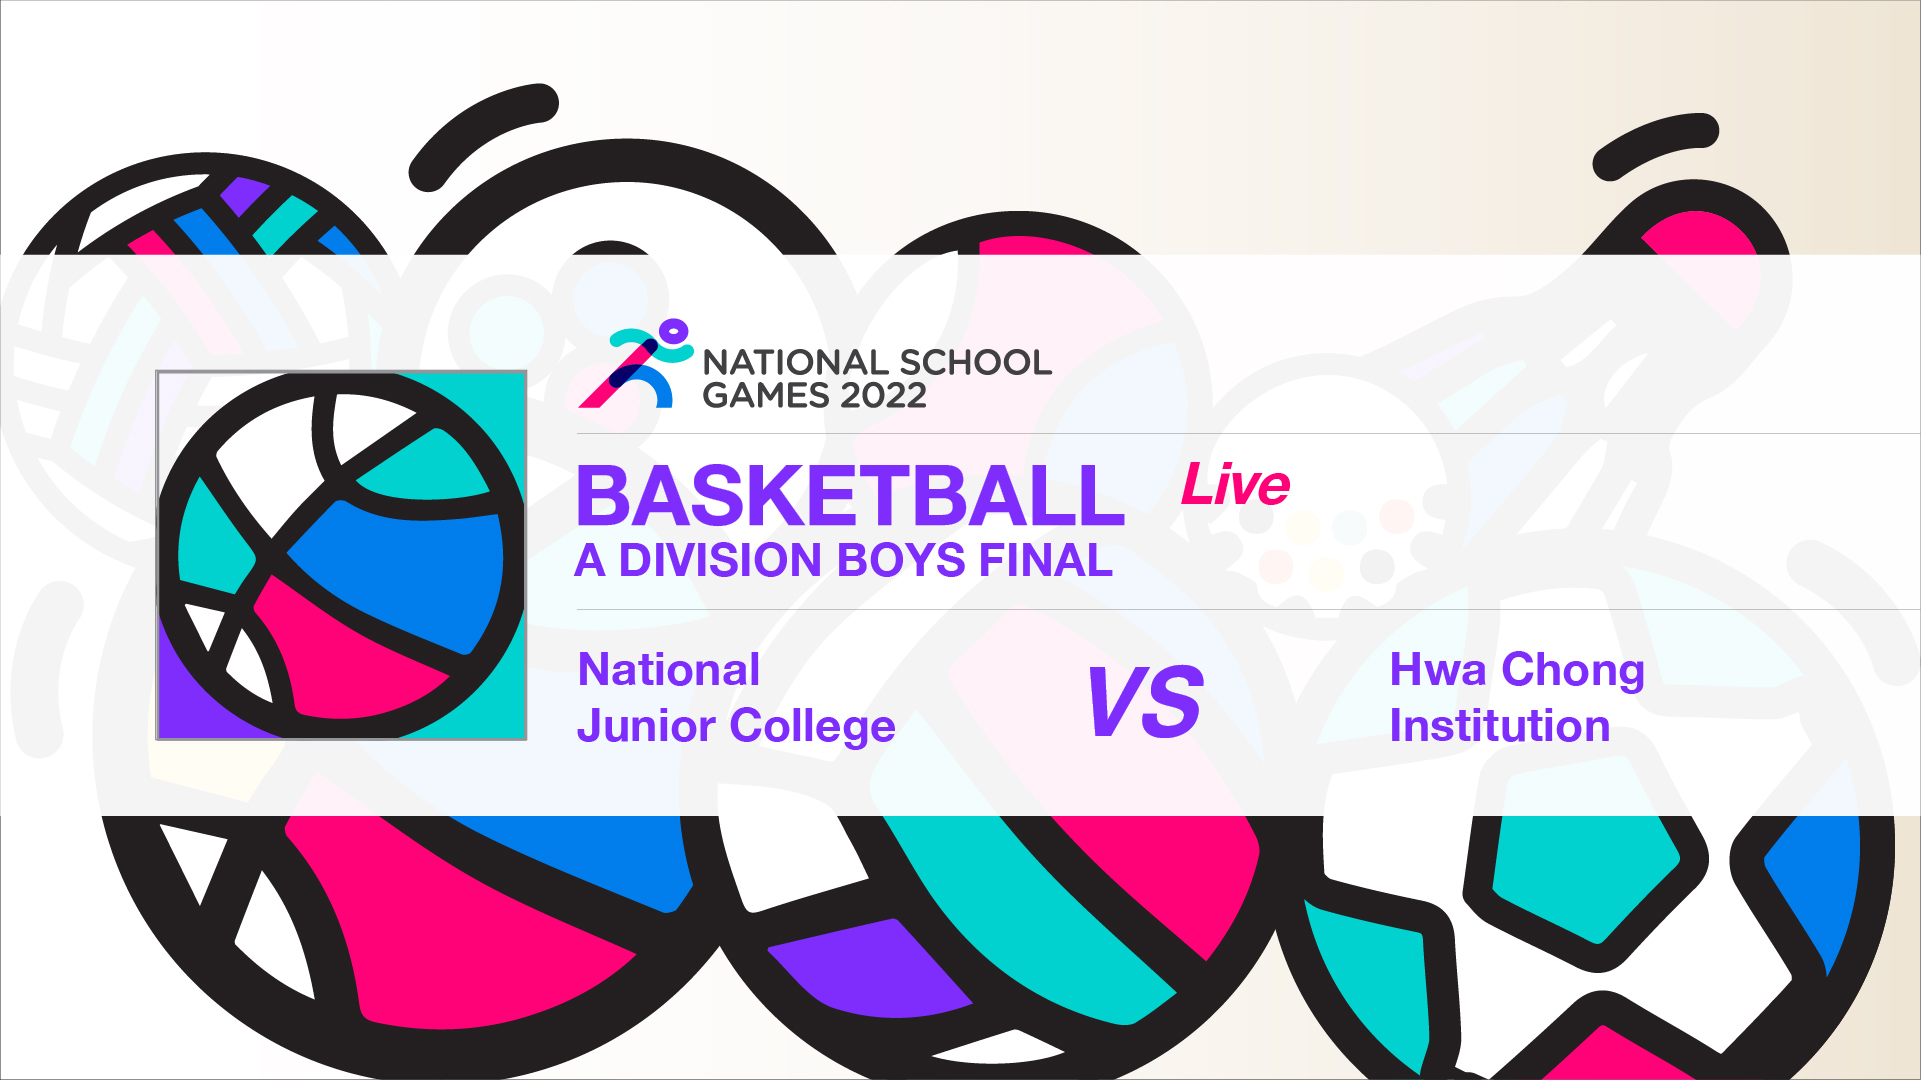 SSSC Basketball A Division Boys Final | National Junior College vs Hwa Chong Instituition